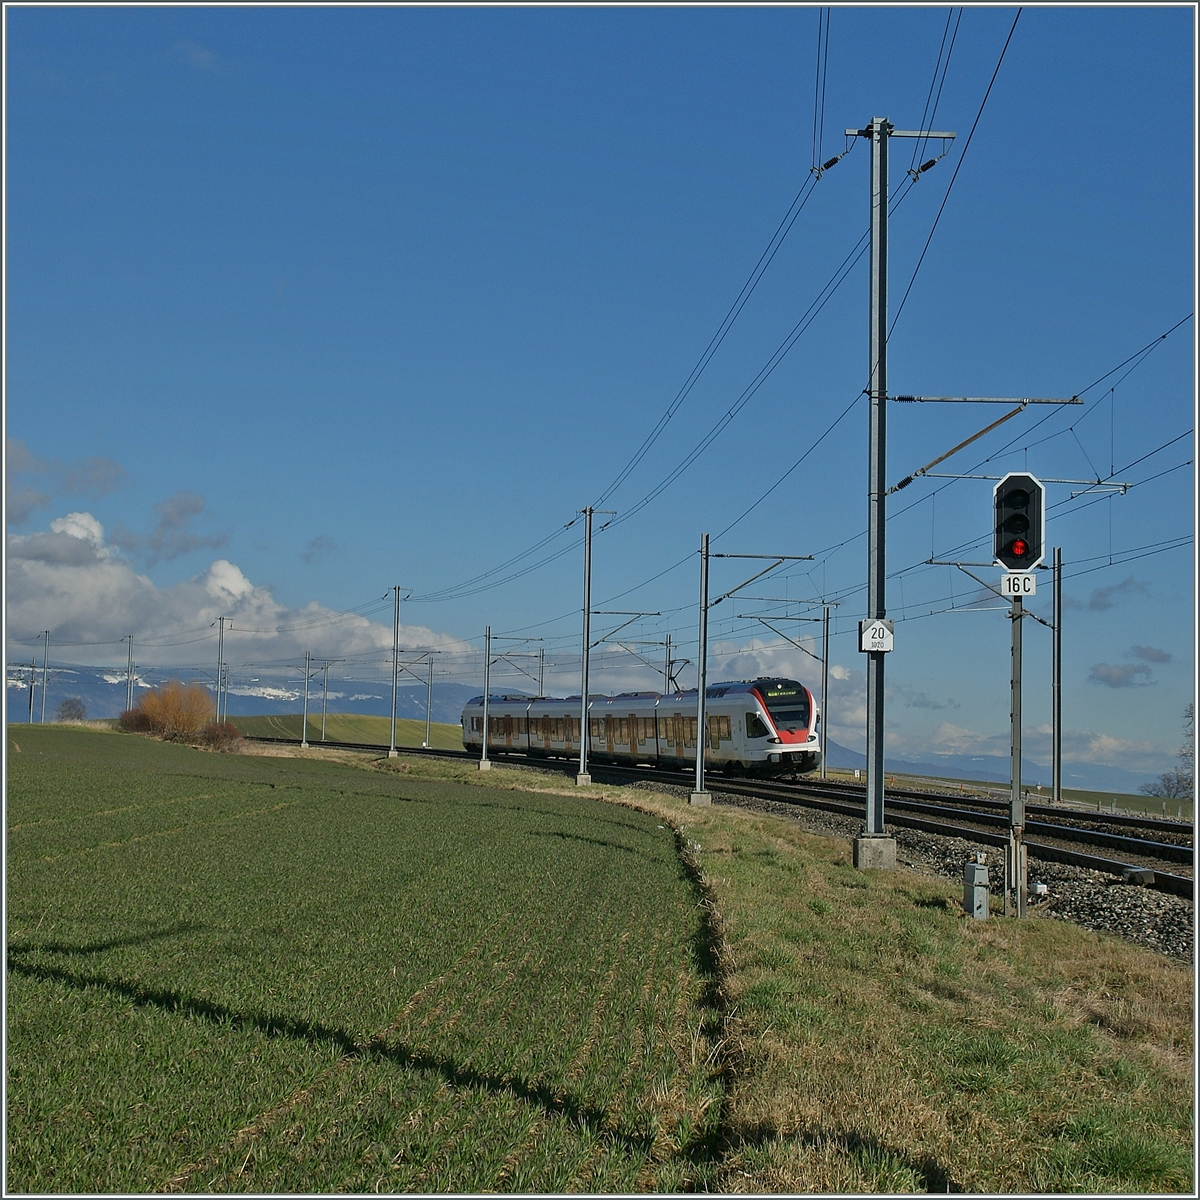 A SBB Flirt on the way from Vallorbe to Lausanne by Arnex.
12.02.2014